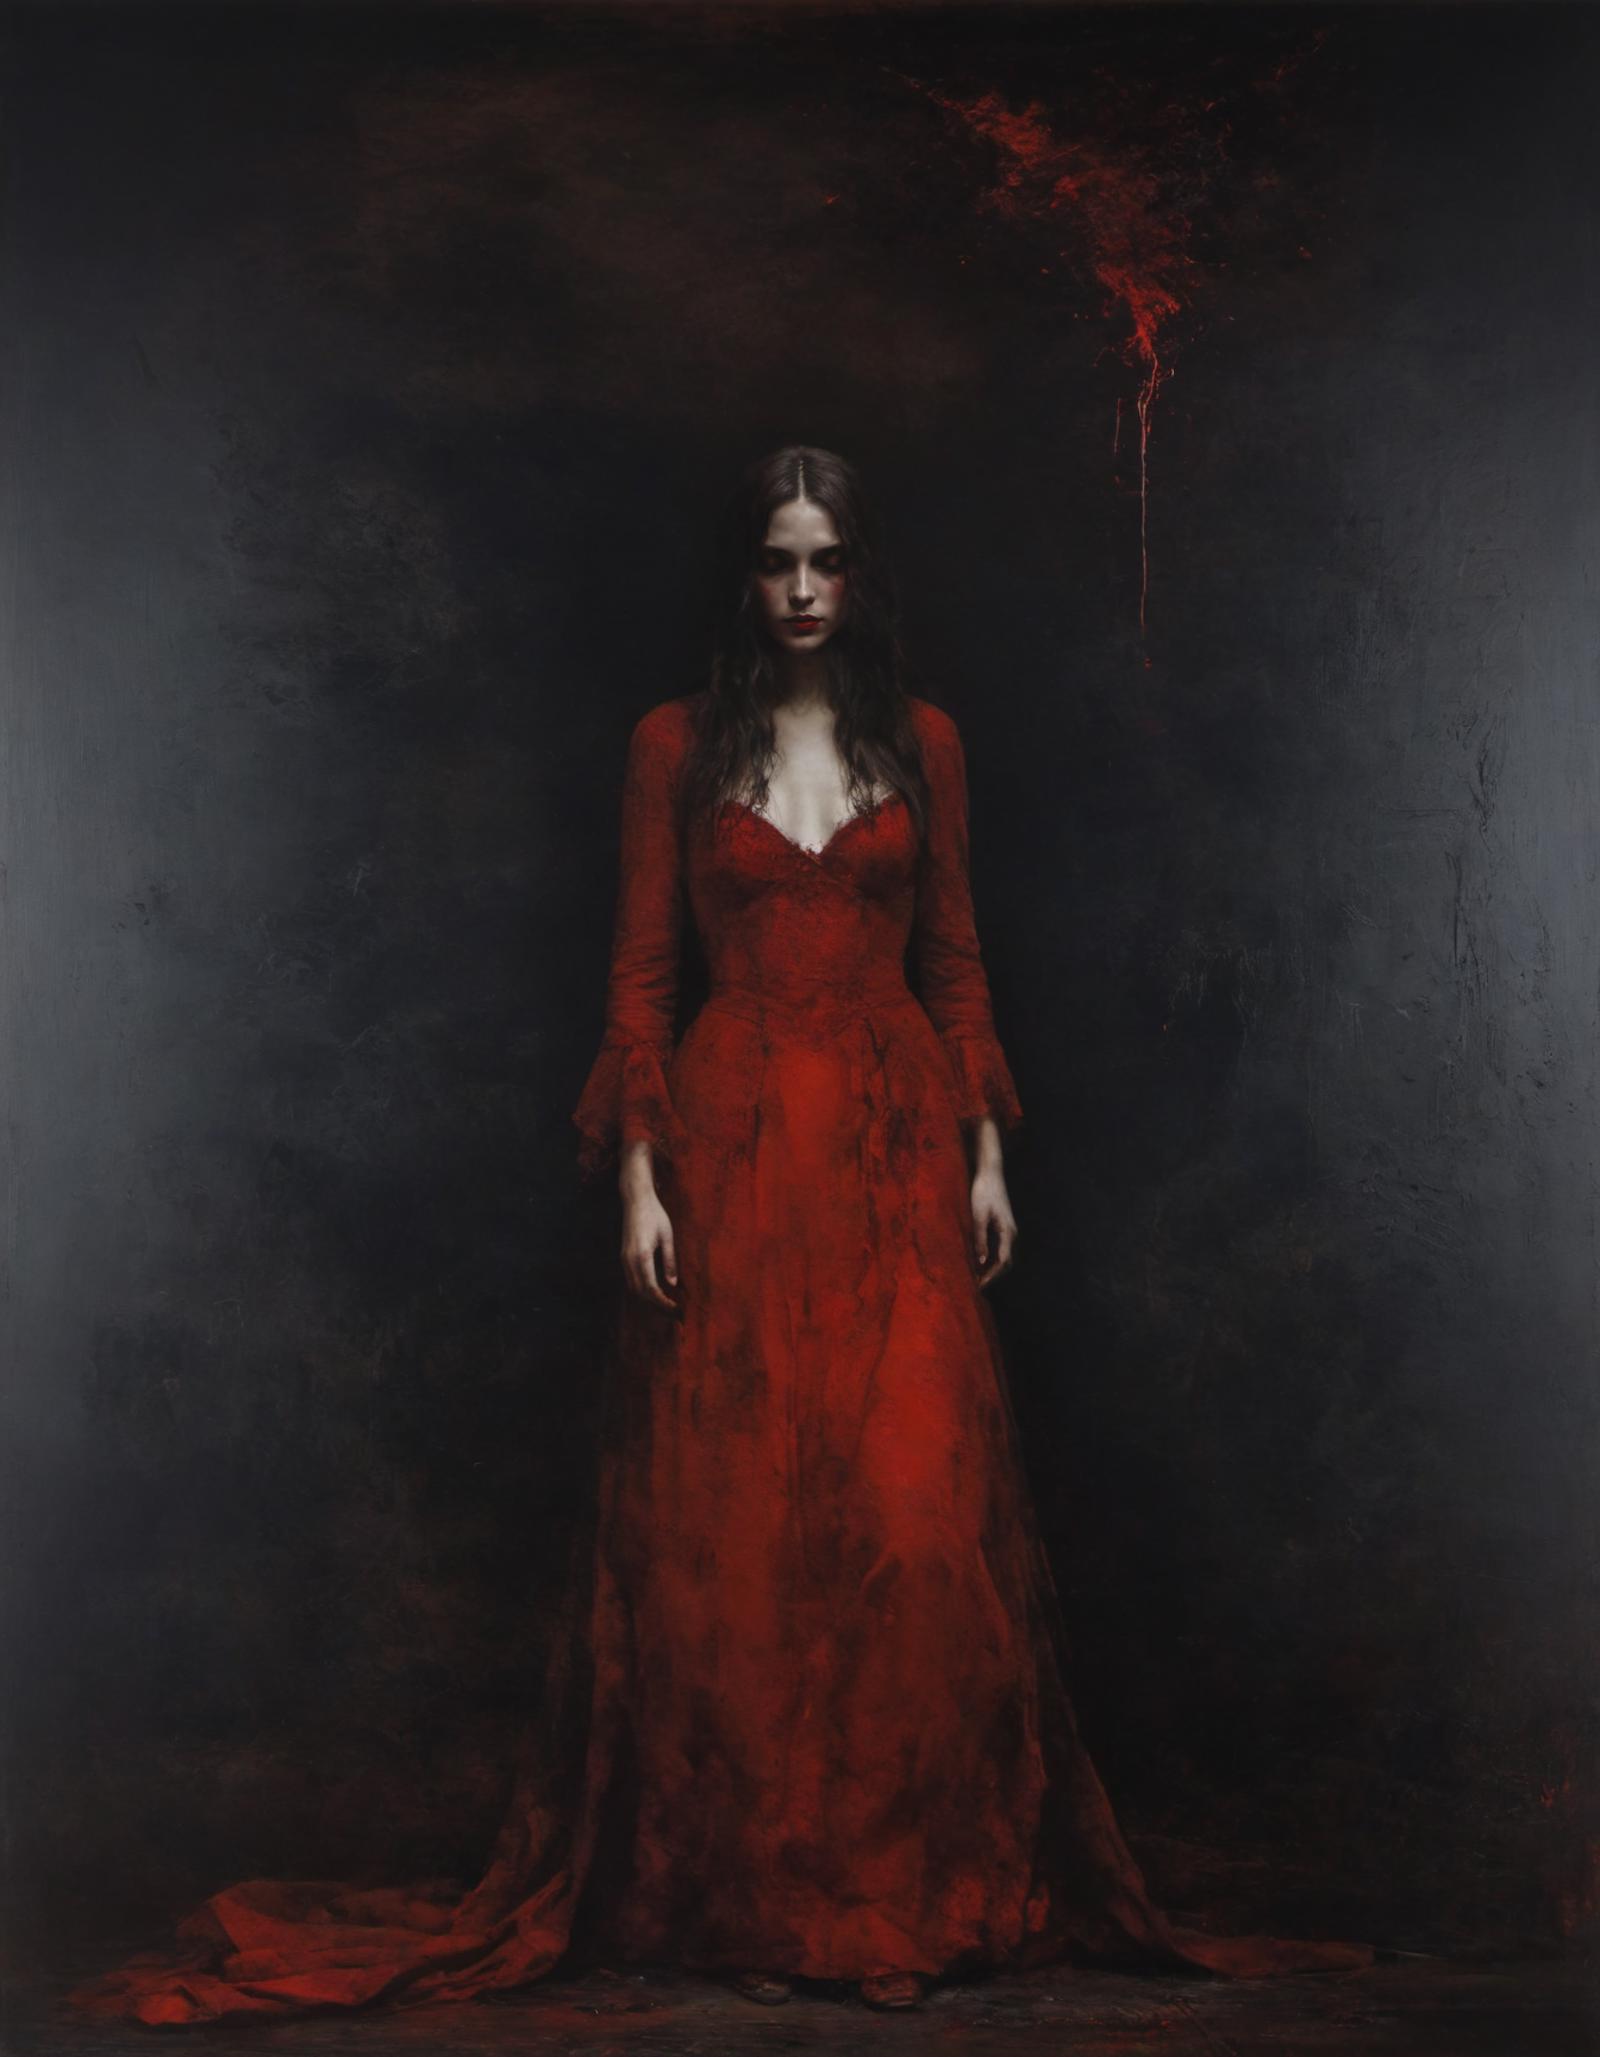 A woman in a red dress stands in a dark room.